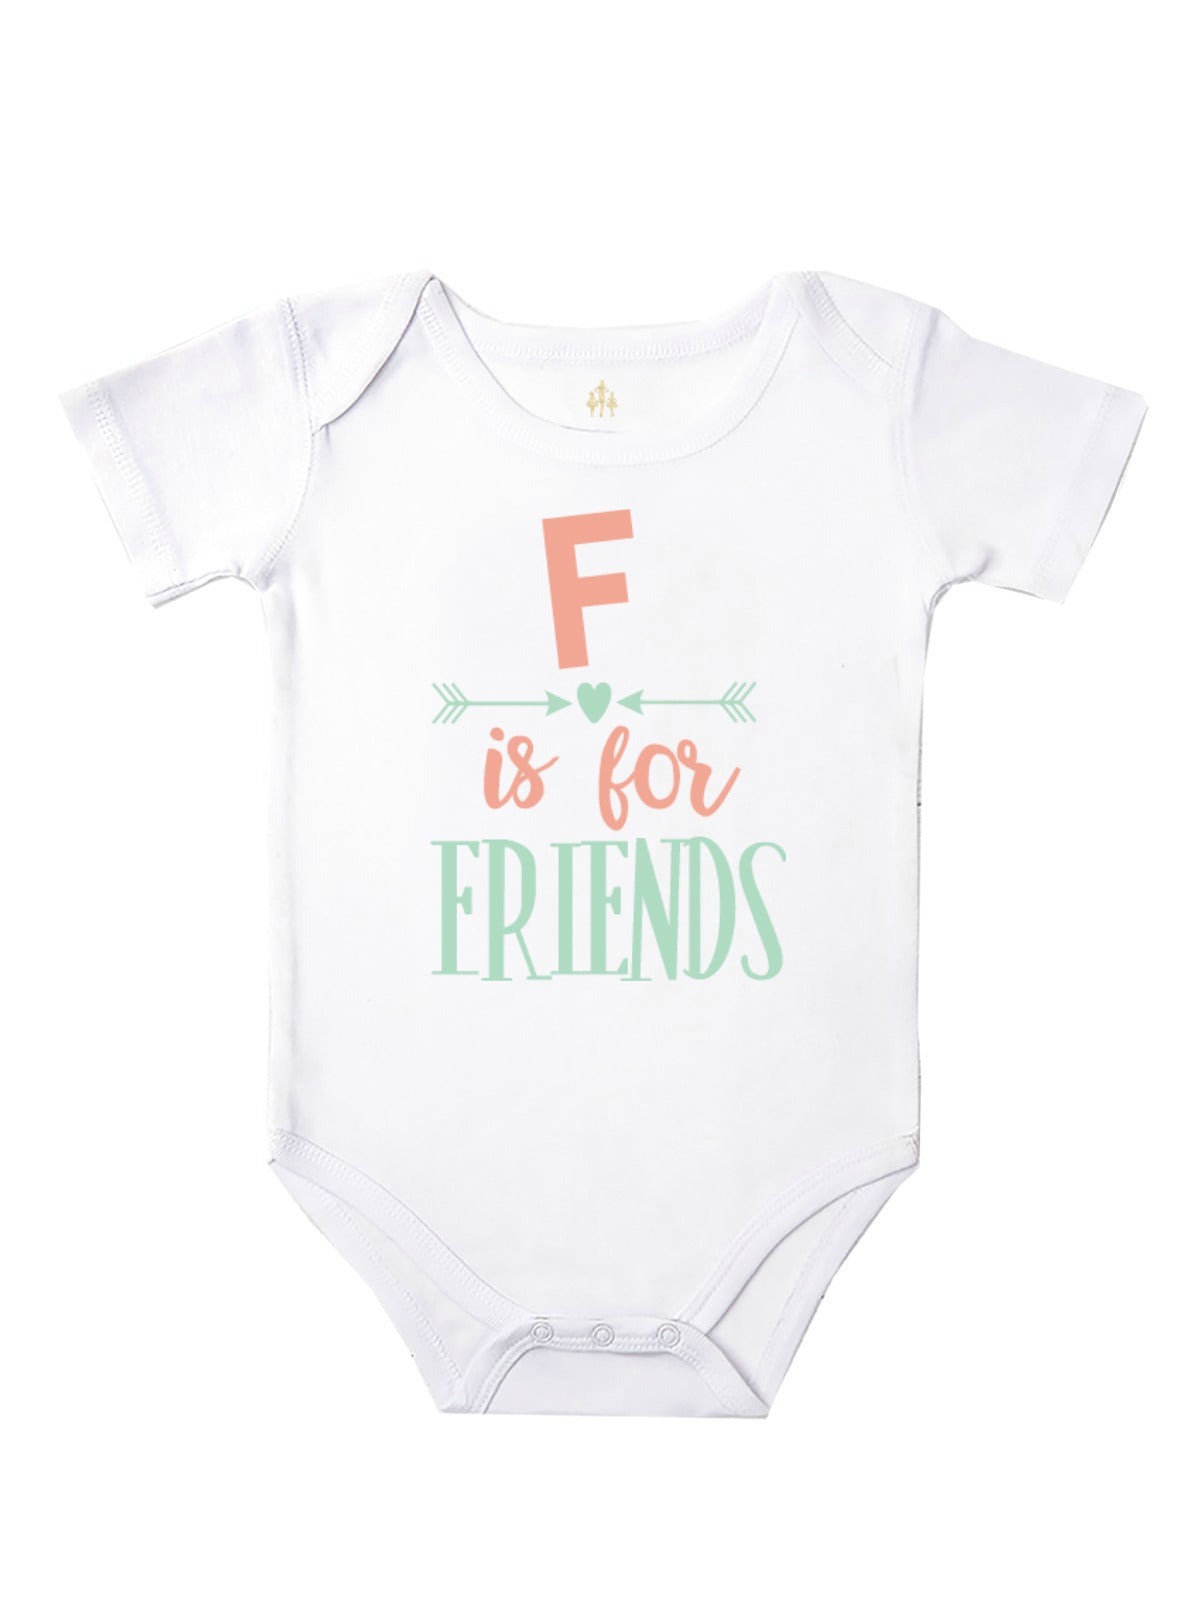 F is for friends baby bodysuit